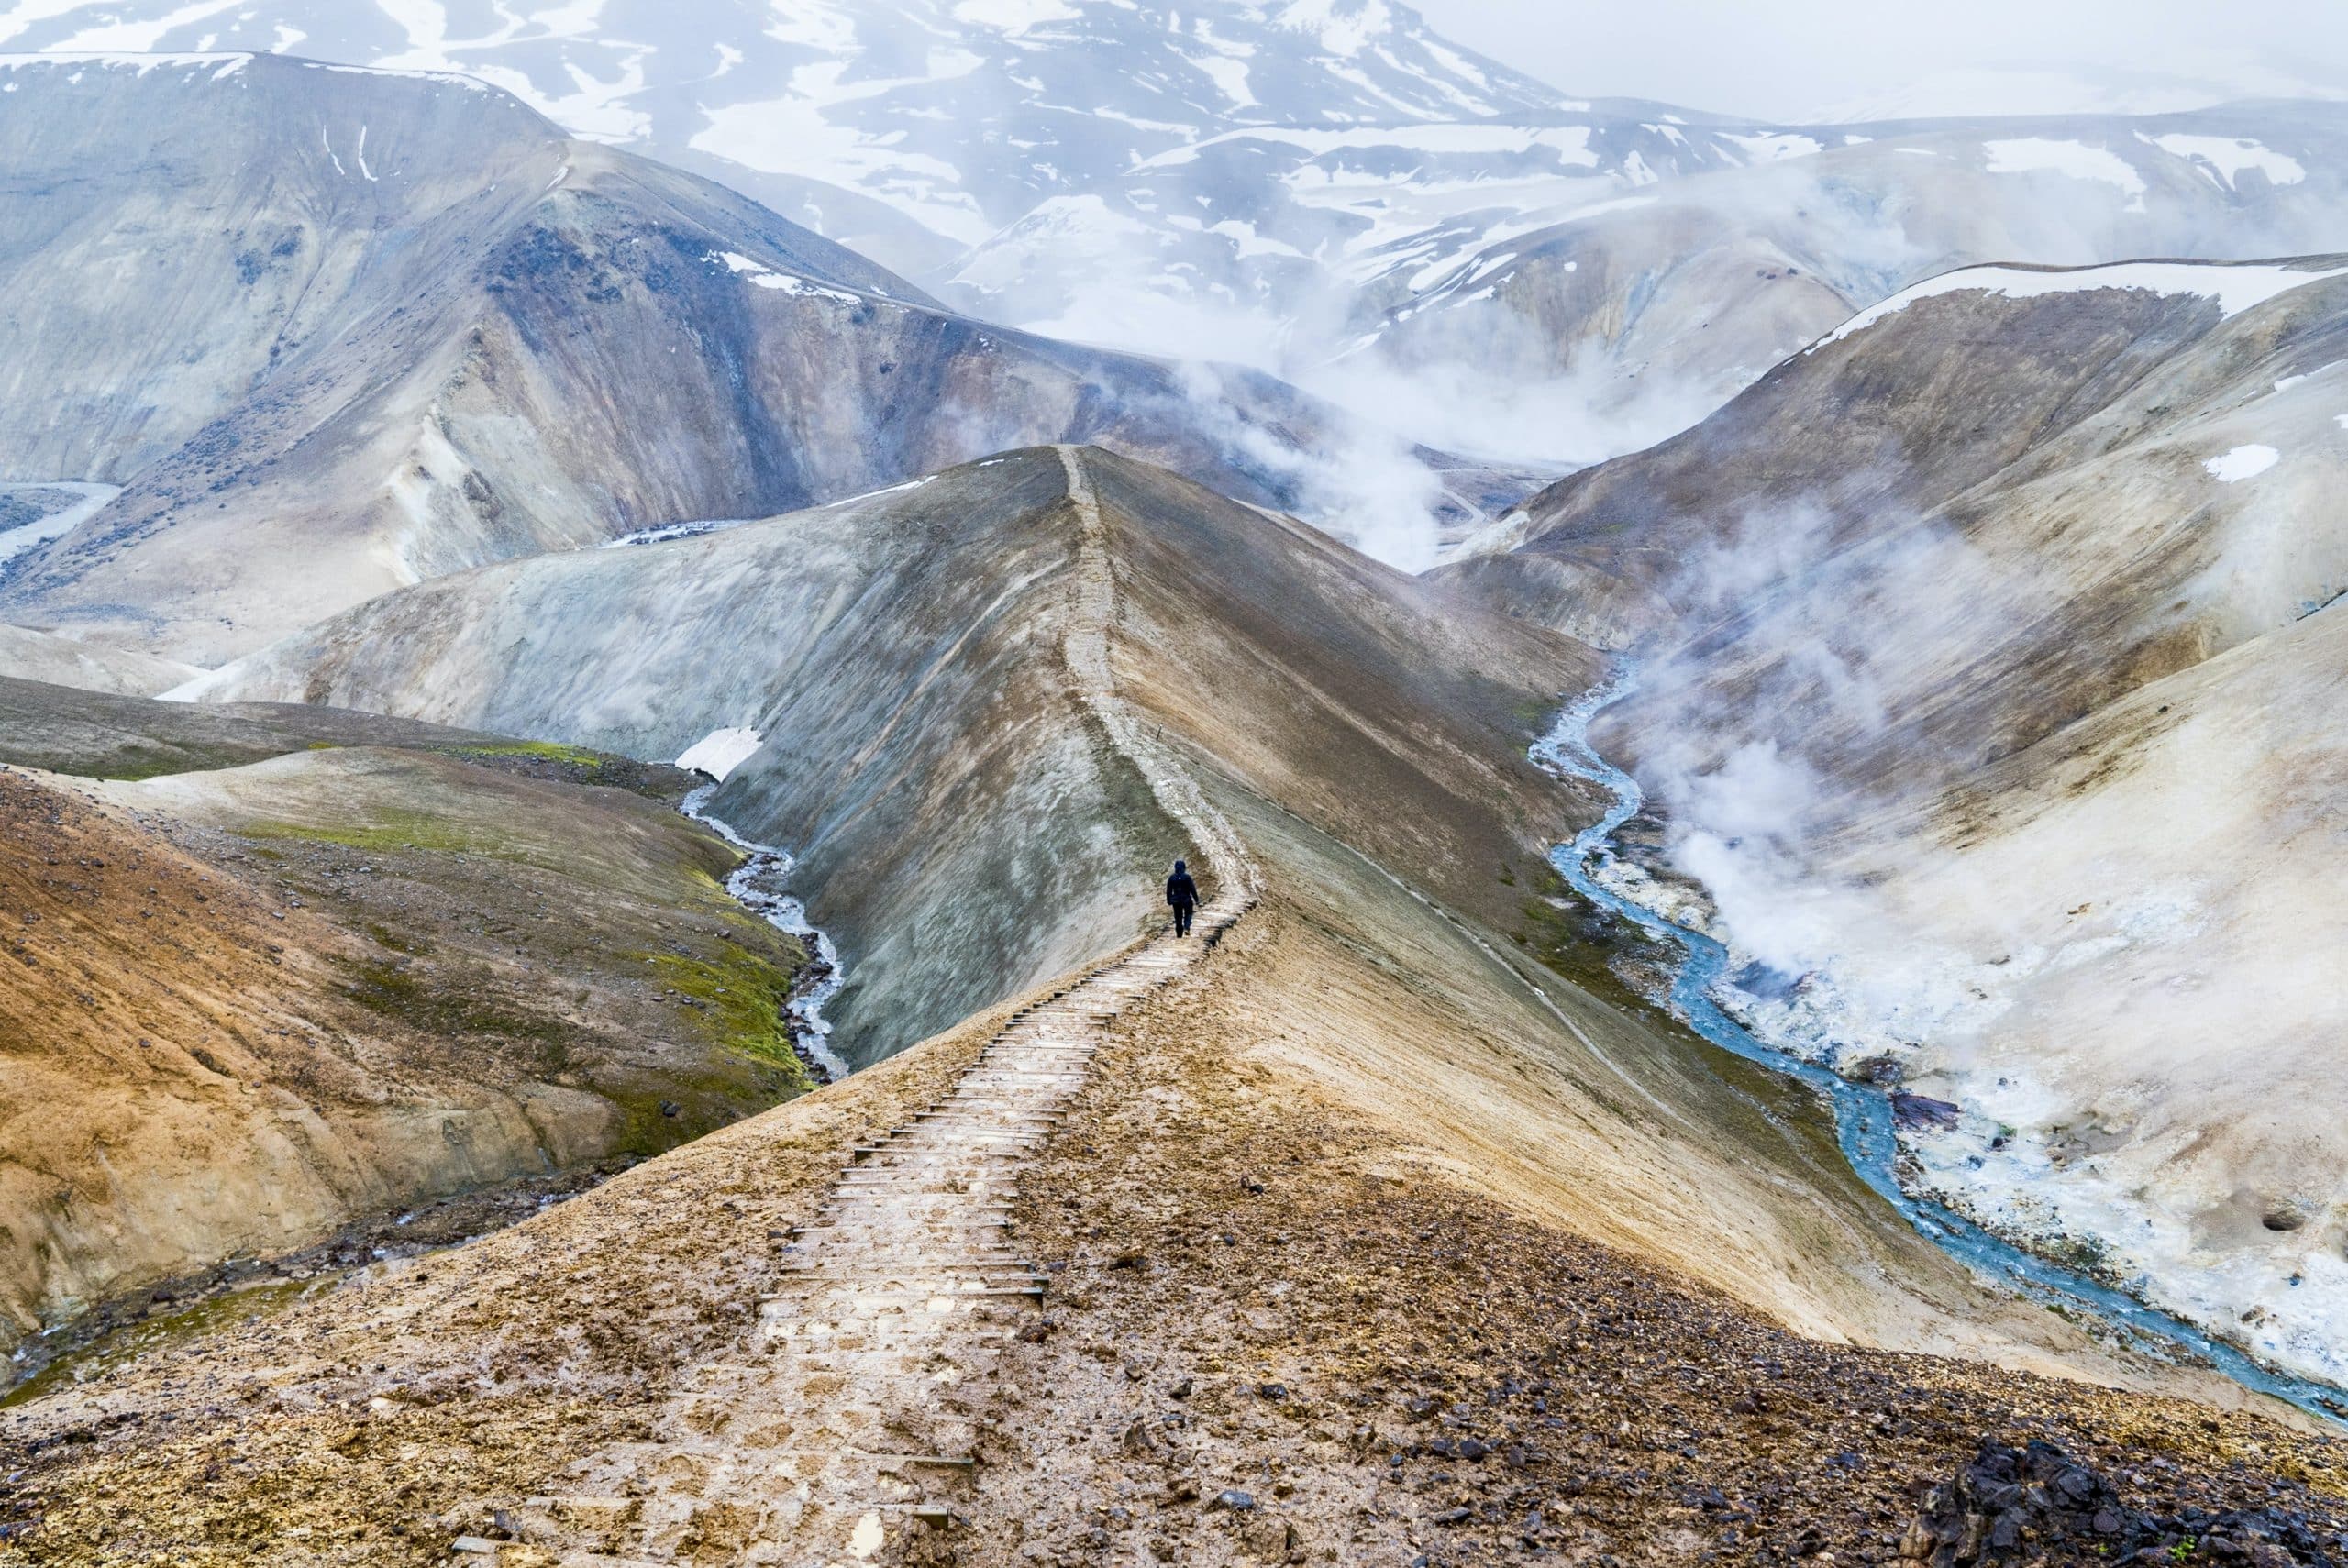 A person walking on a path in Iceland's Highlands, surrounded by steaming mountains.